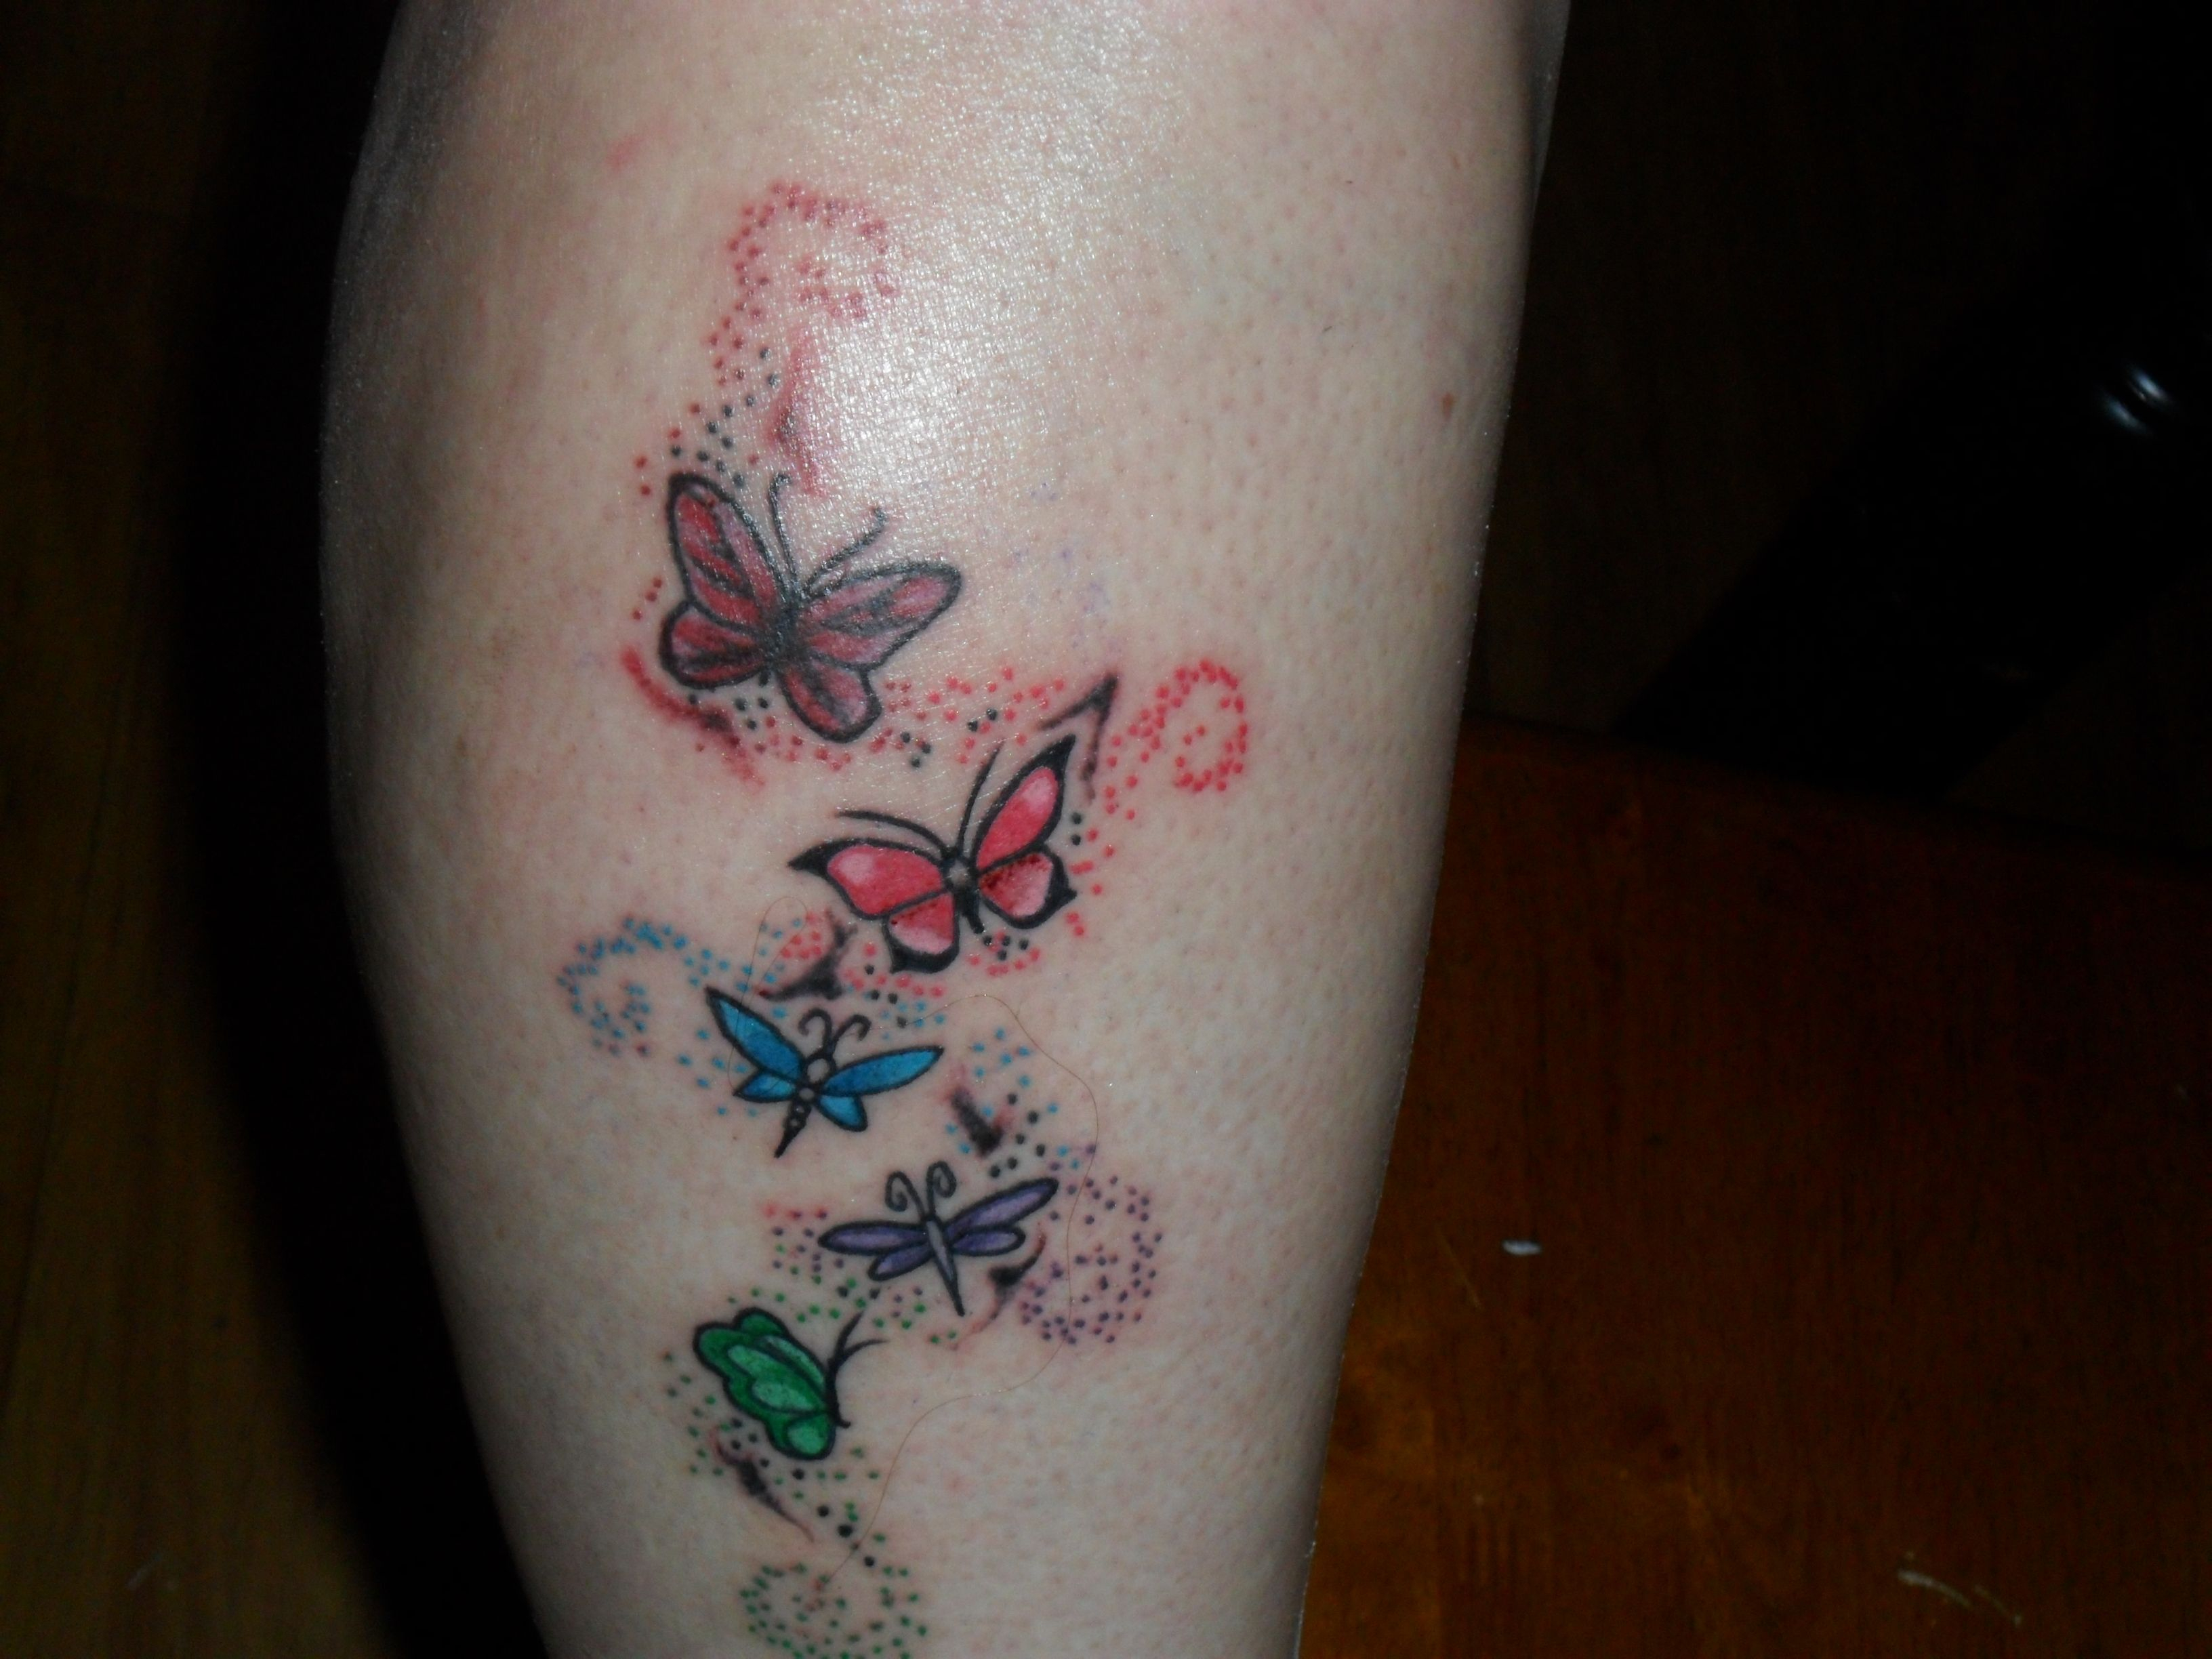 Tattoo That Represents My Kids Butterflies Are The Girls Dragonflies pertaining to dimensions 3264 X 2448